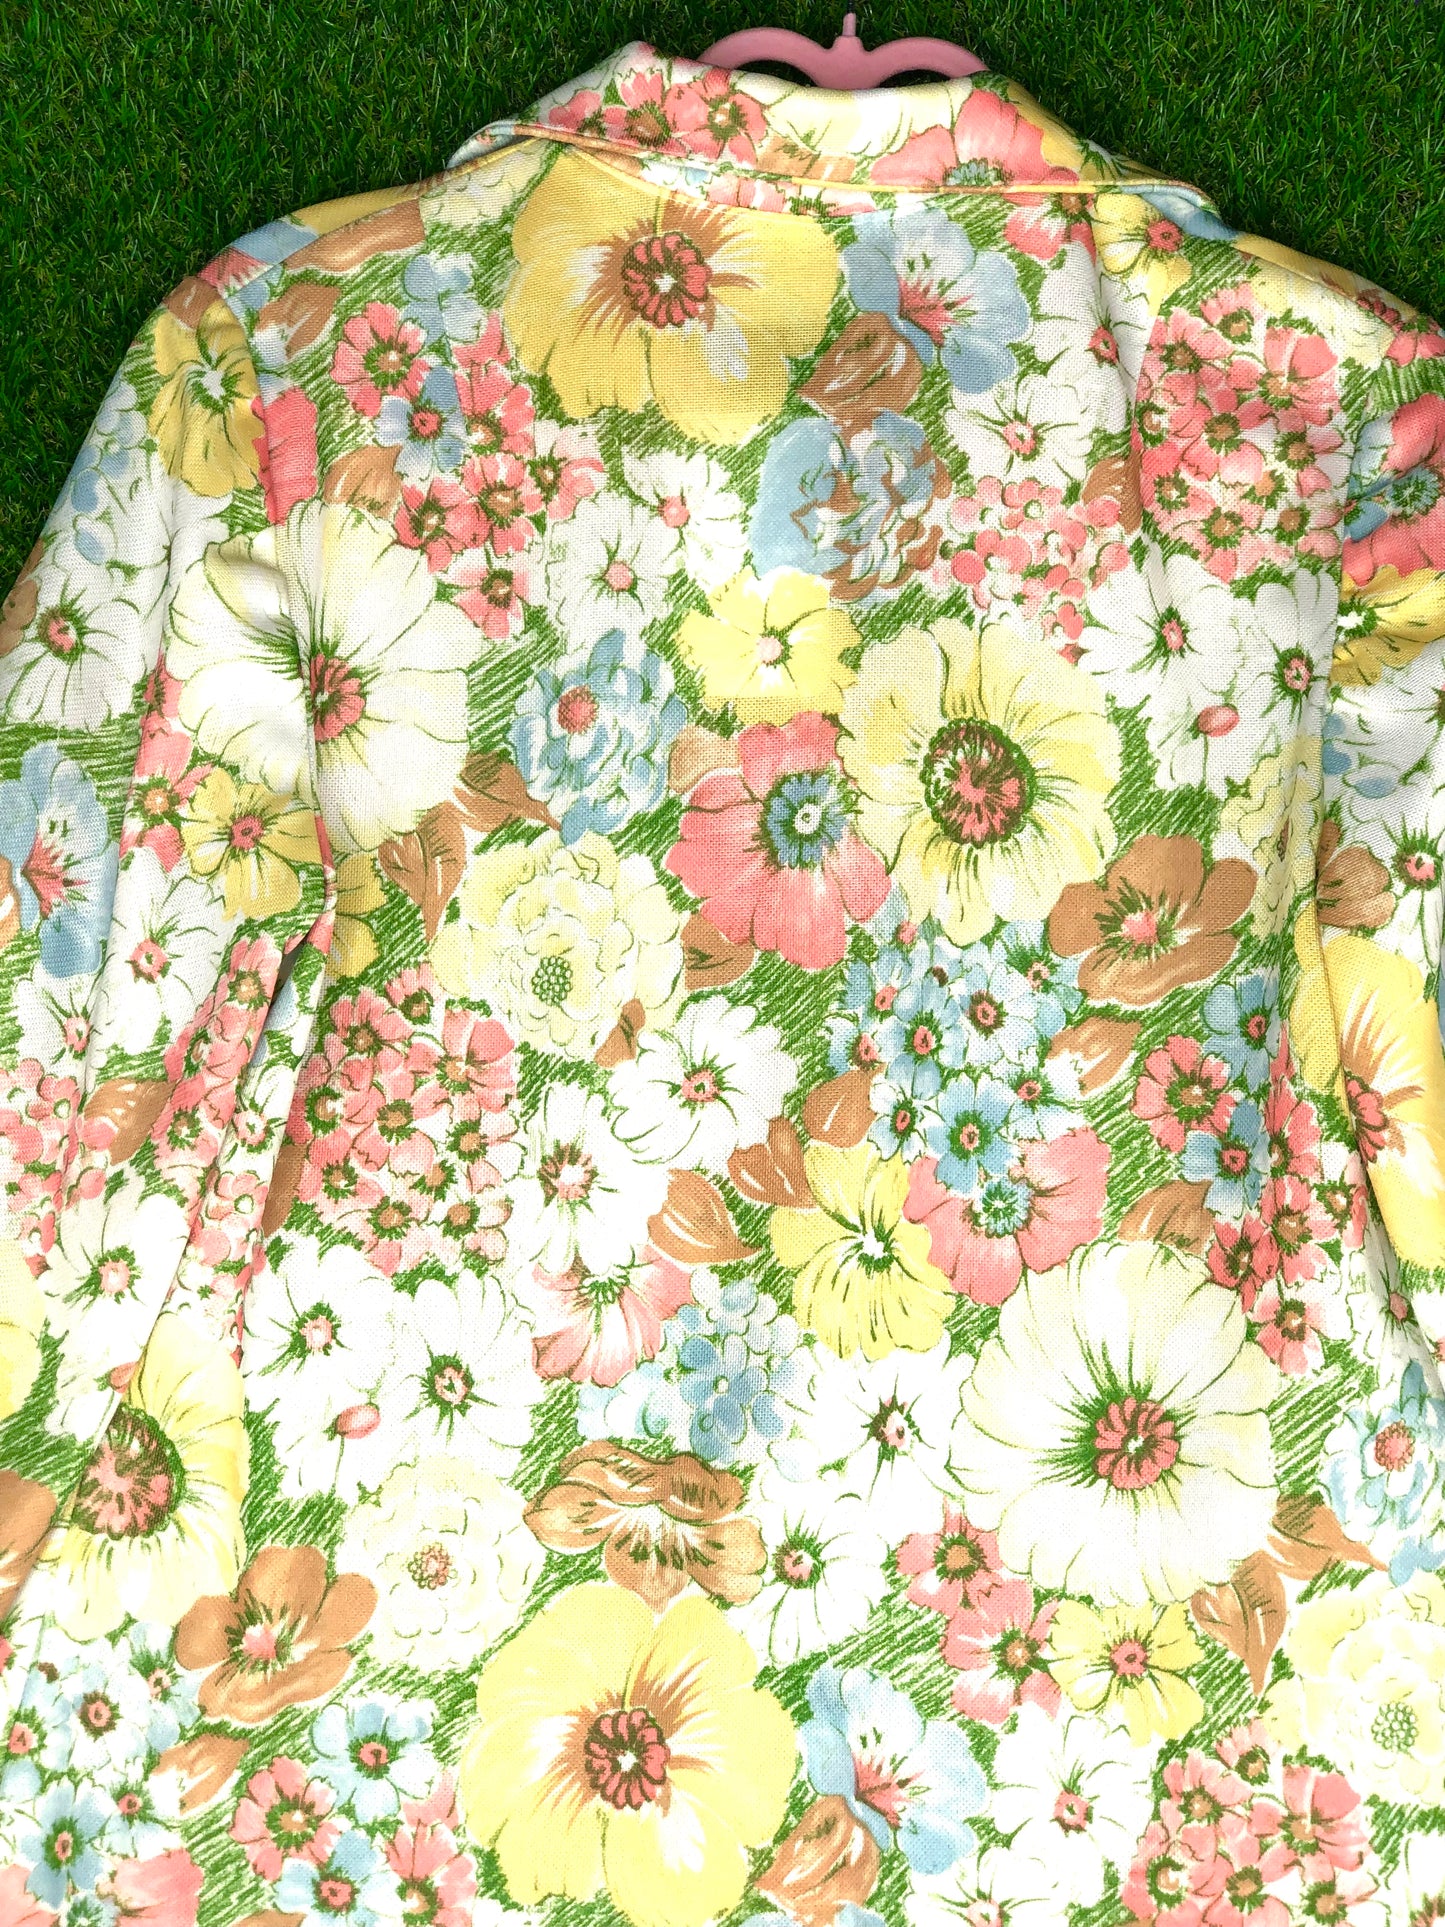 1970's Dreamy Sketched-Style Pastel Flower Top